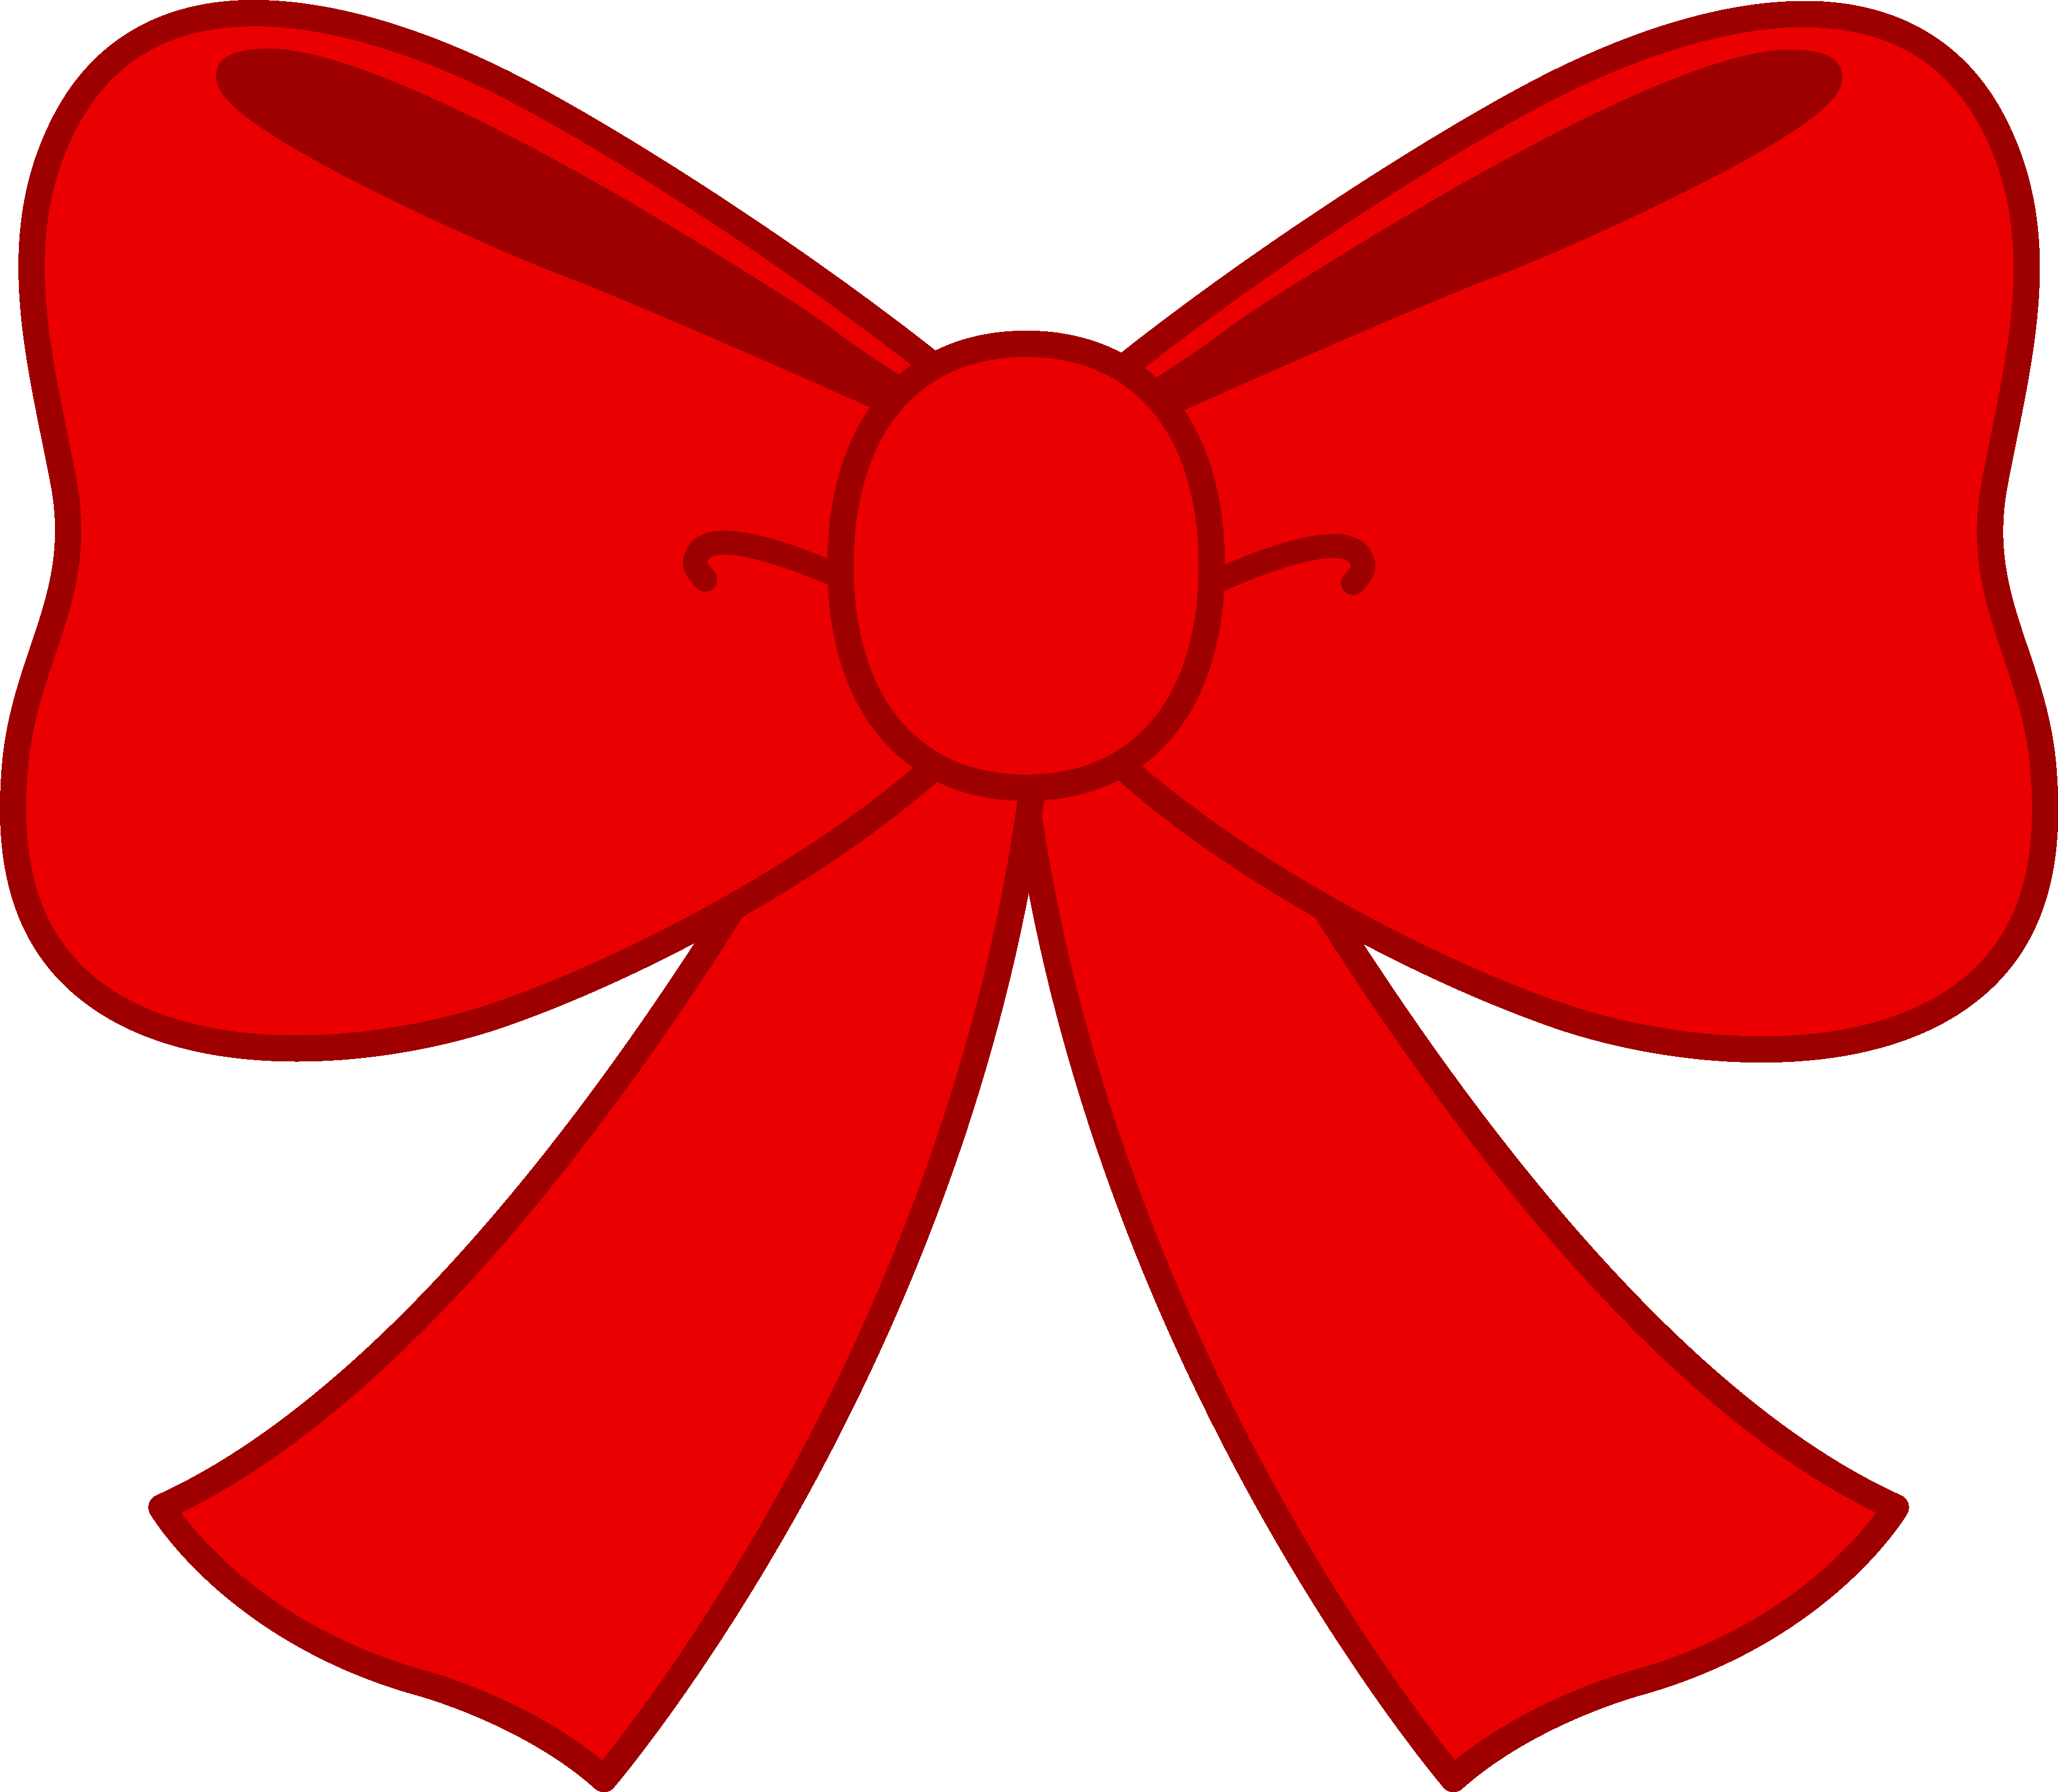 Cute red bow.